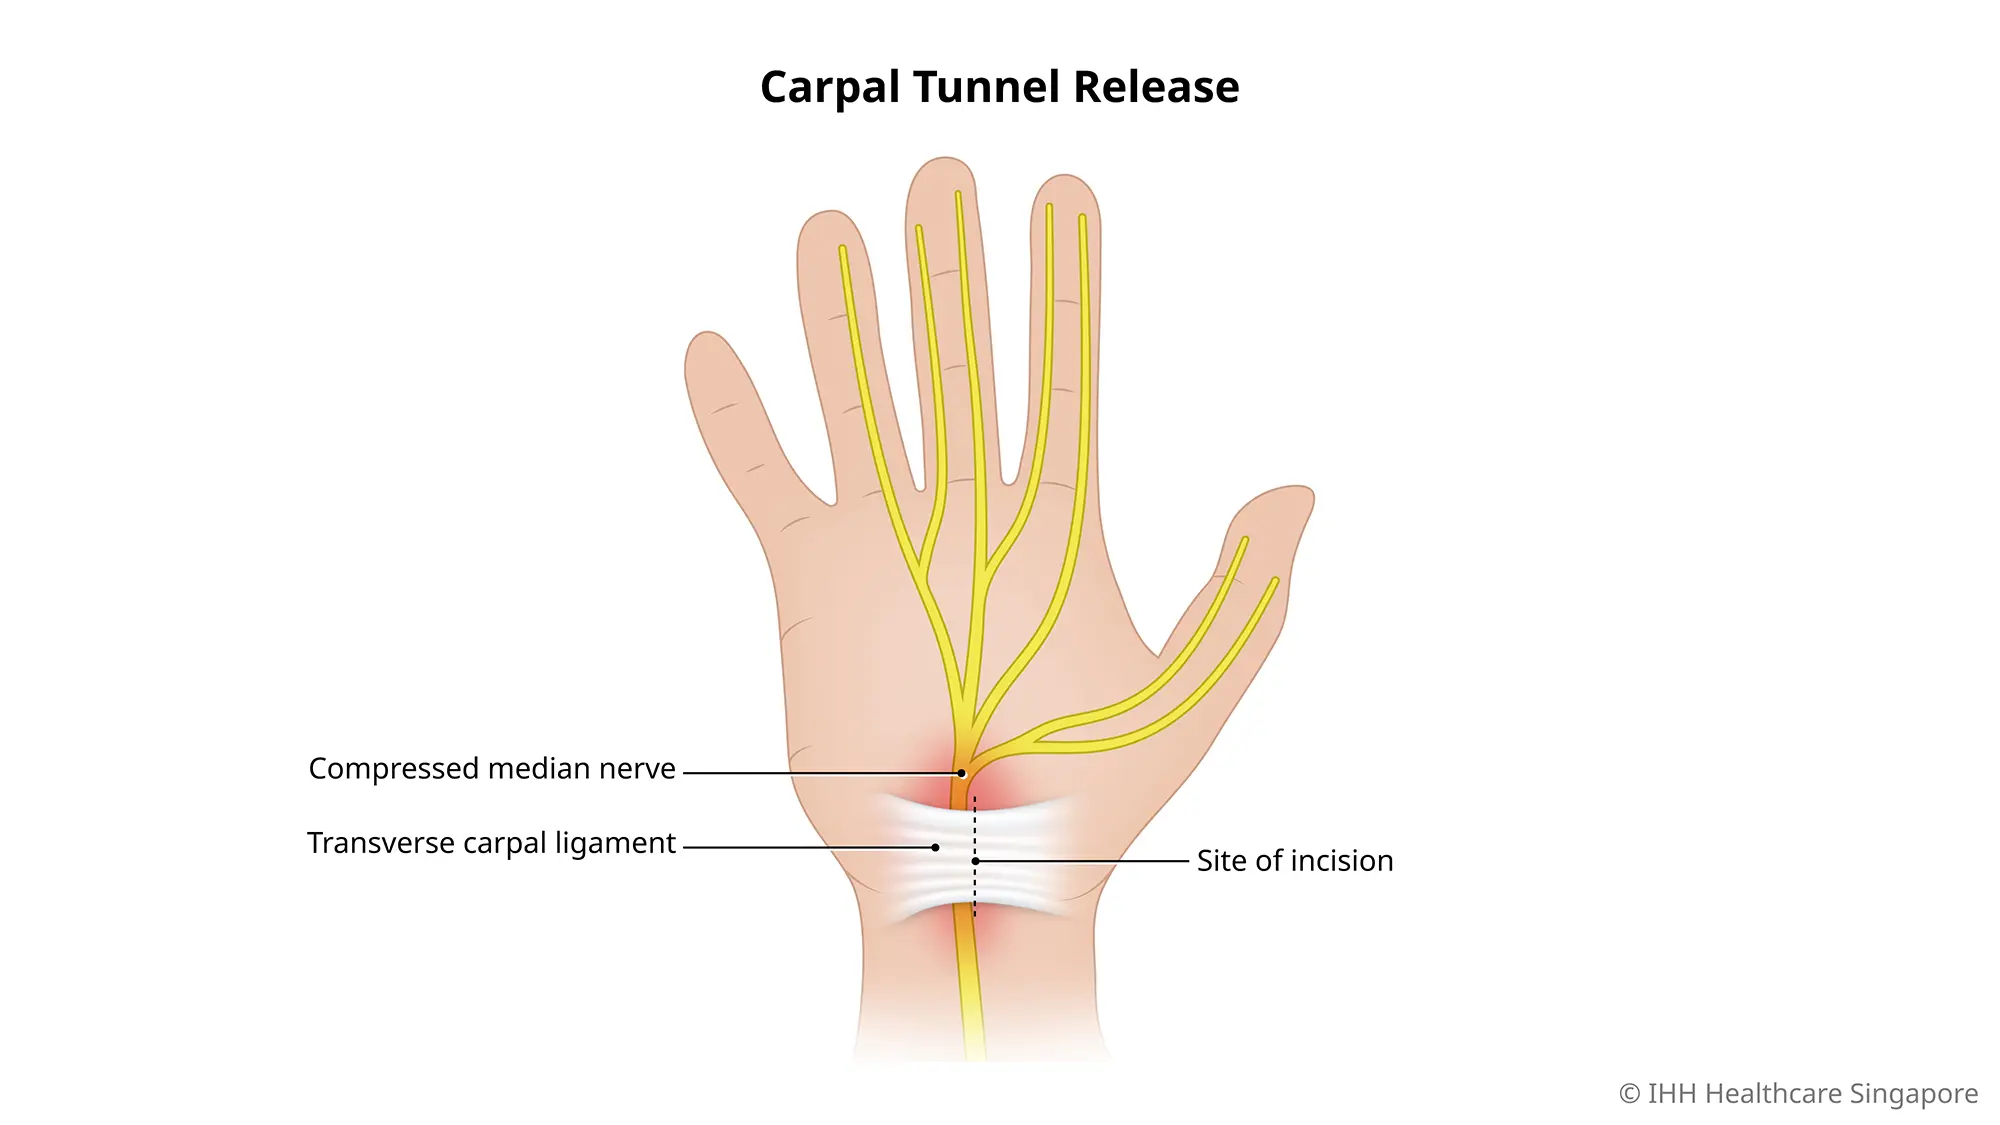 Carpal tunnel release surgery cuts the carpal ligament to reduce pressure on the median nerve